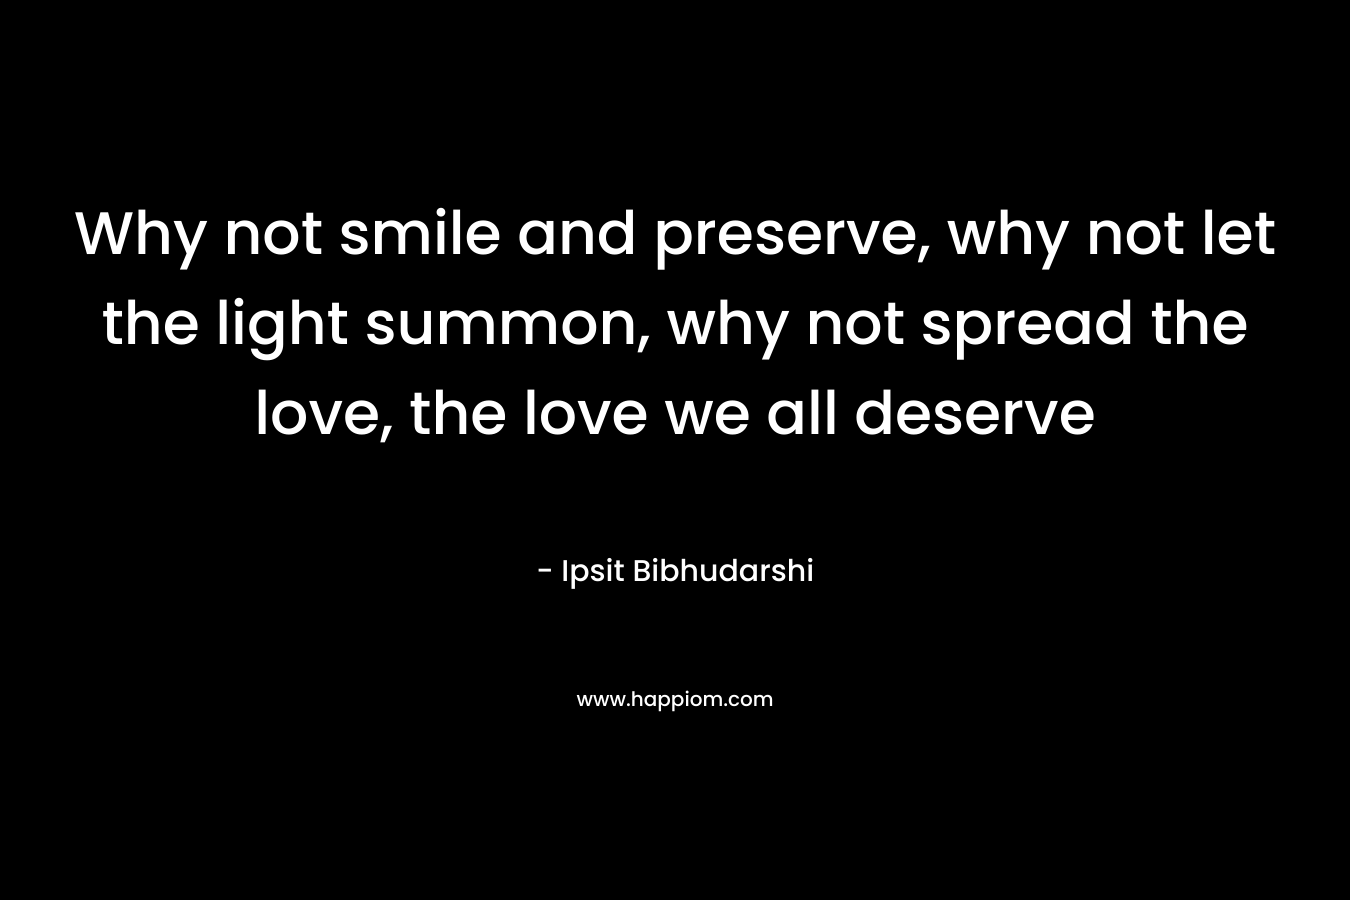 Why not smile and preserve, why not let the light summon, why not spread the love, the love we all deserve